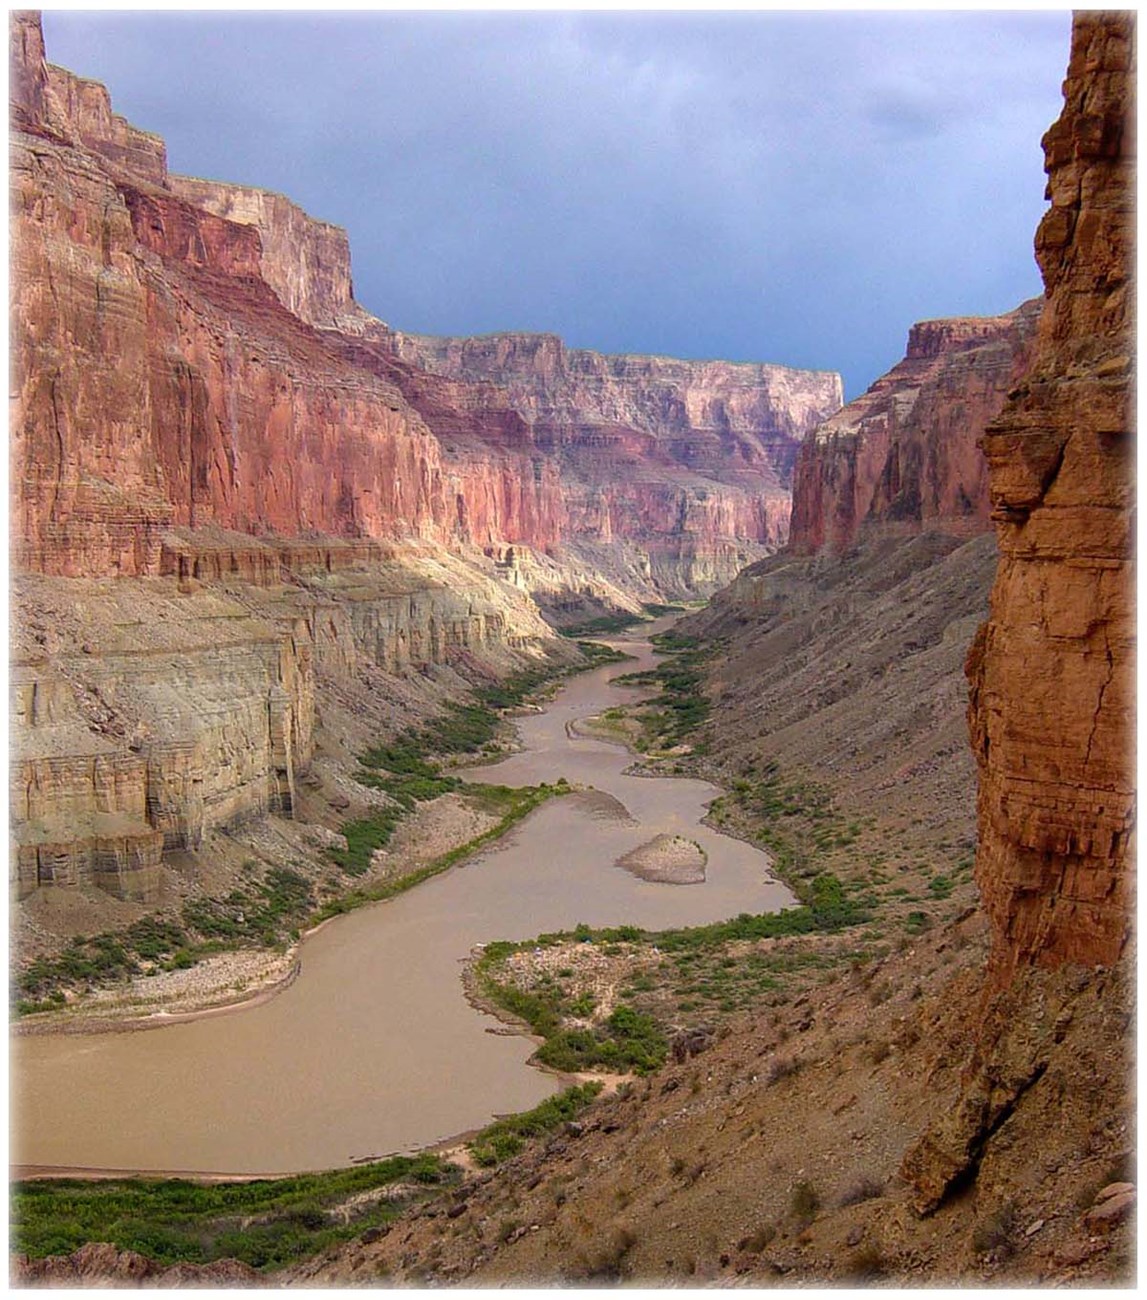 Looking down from a canyon wall at a muddy Colorado River with colorful vermilion cliffs on both sides of the narrow gorge.